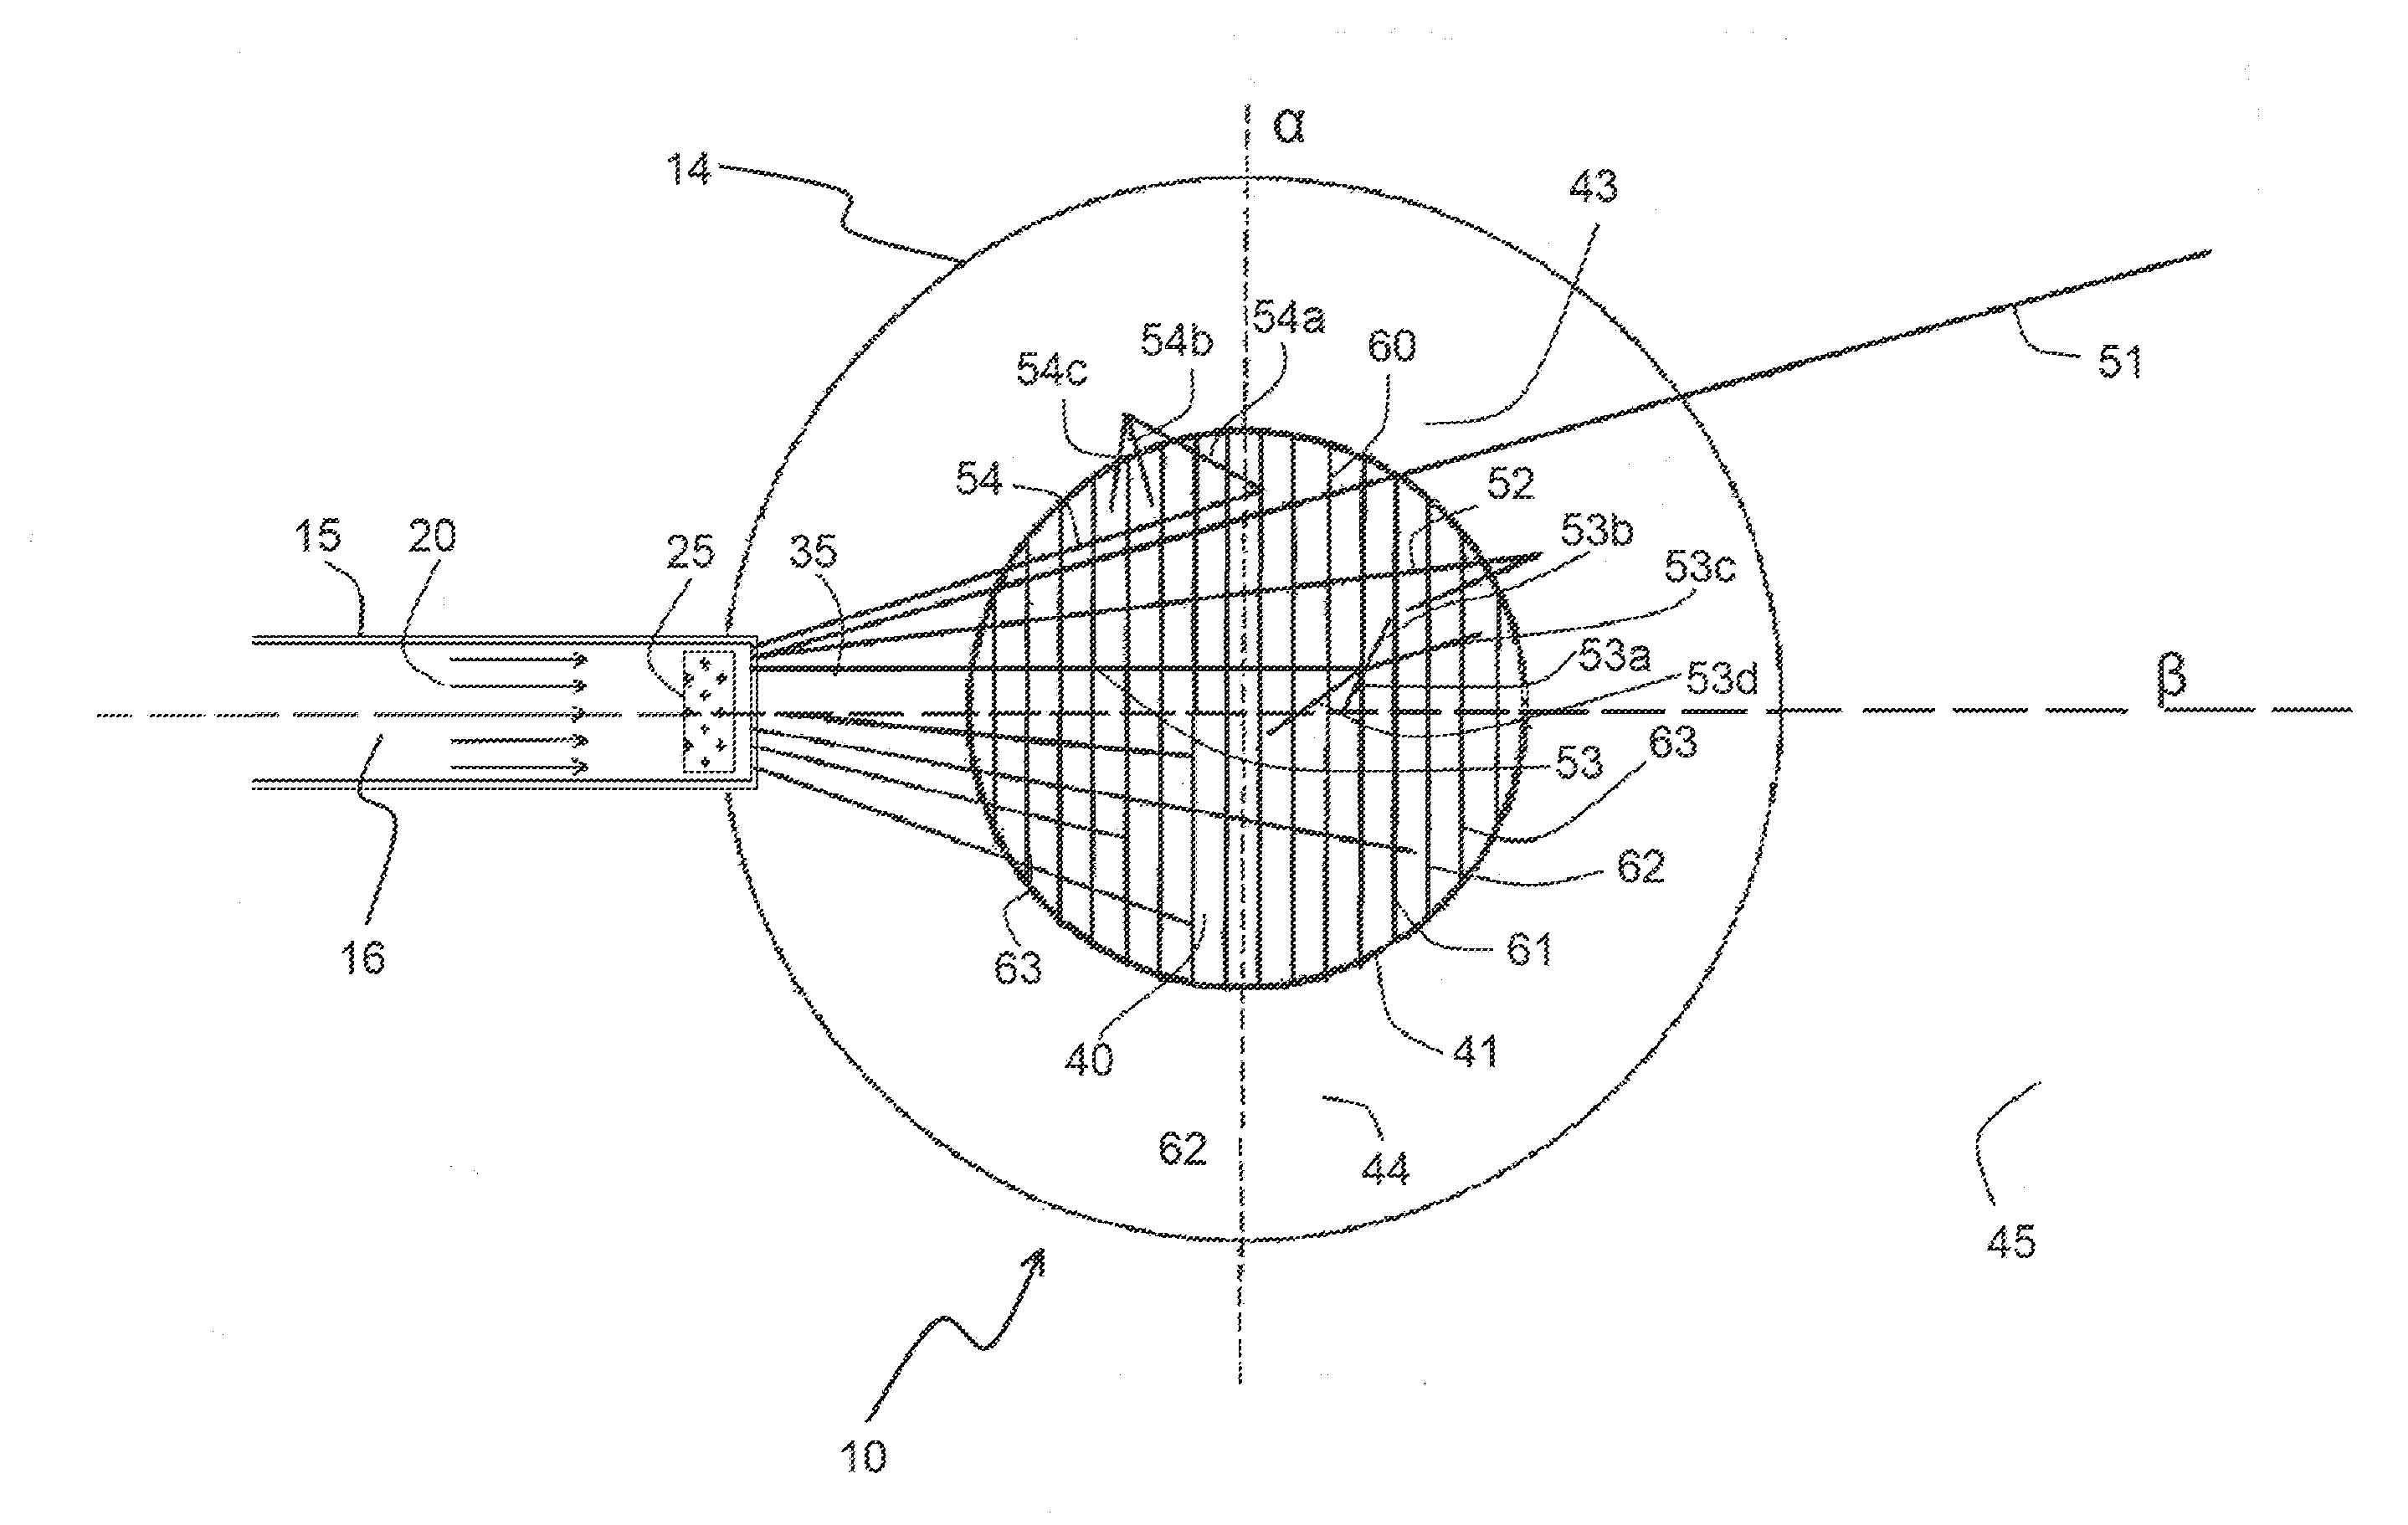 Accelerator-based method of producing isotopes